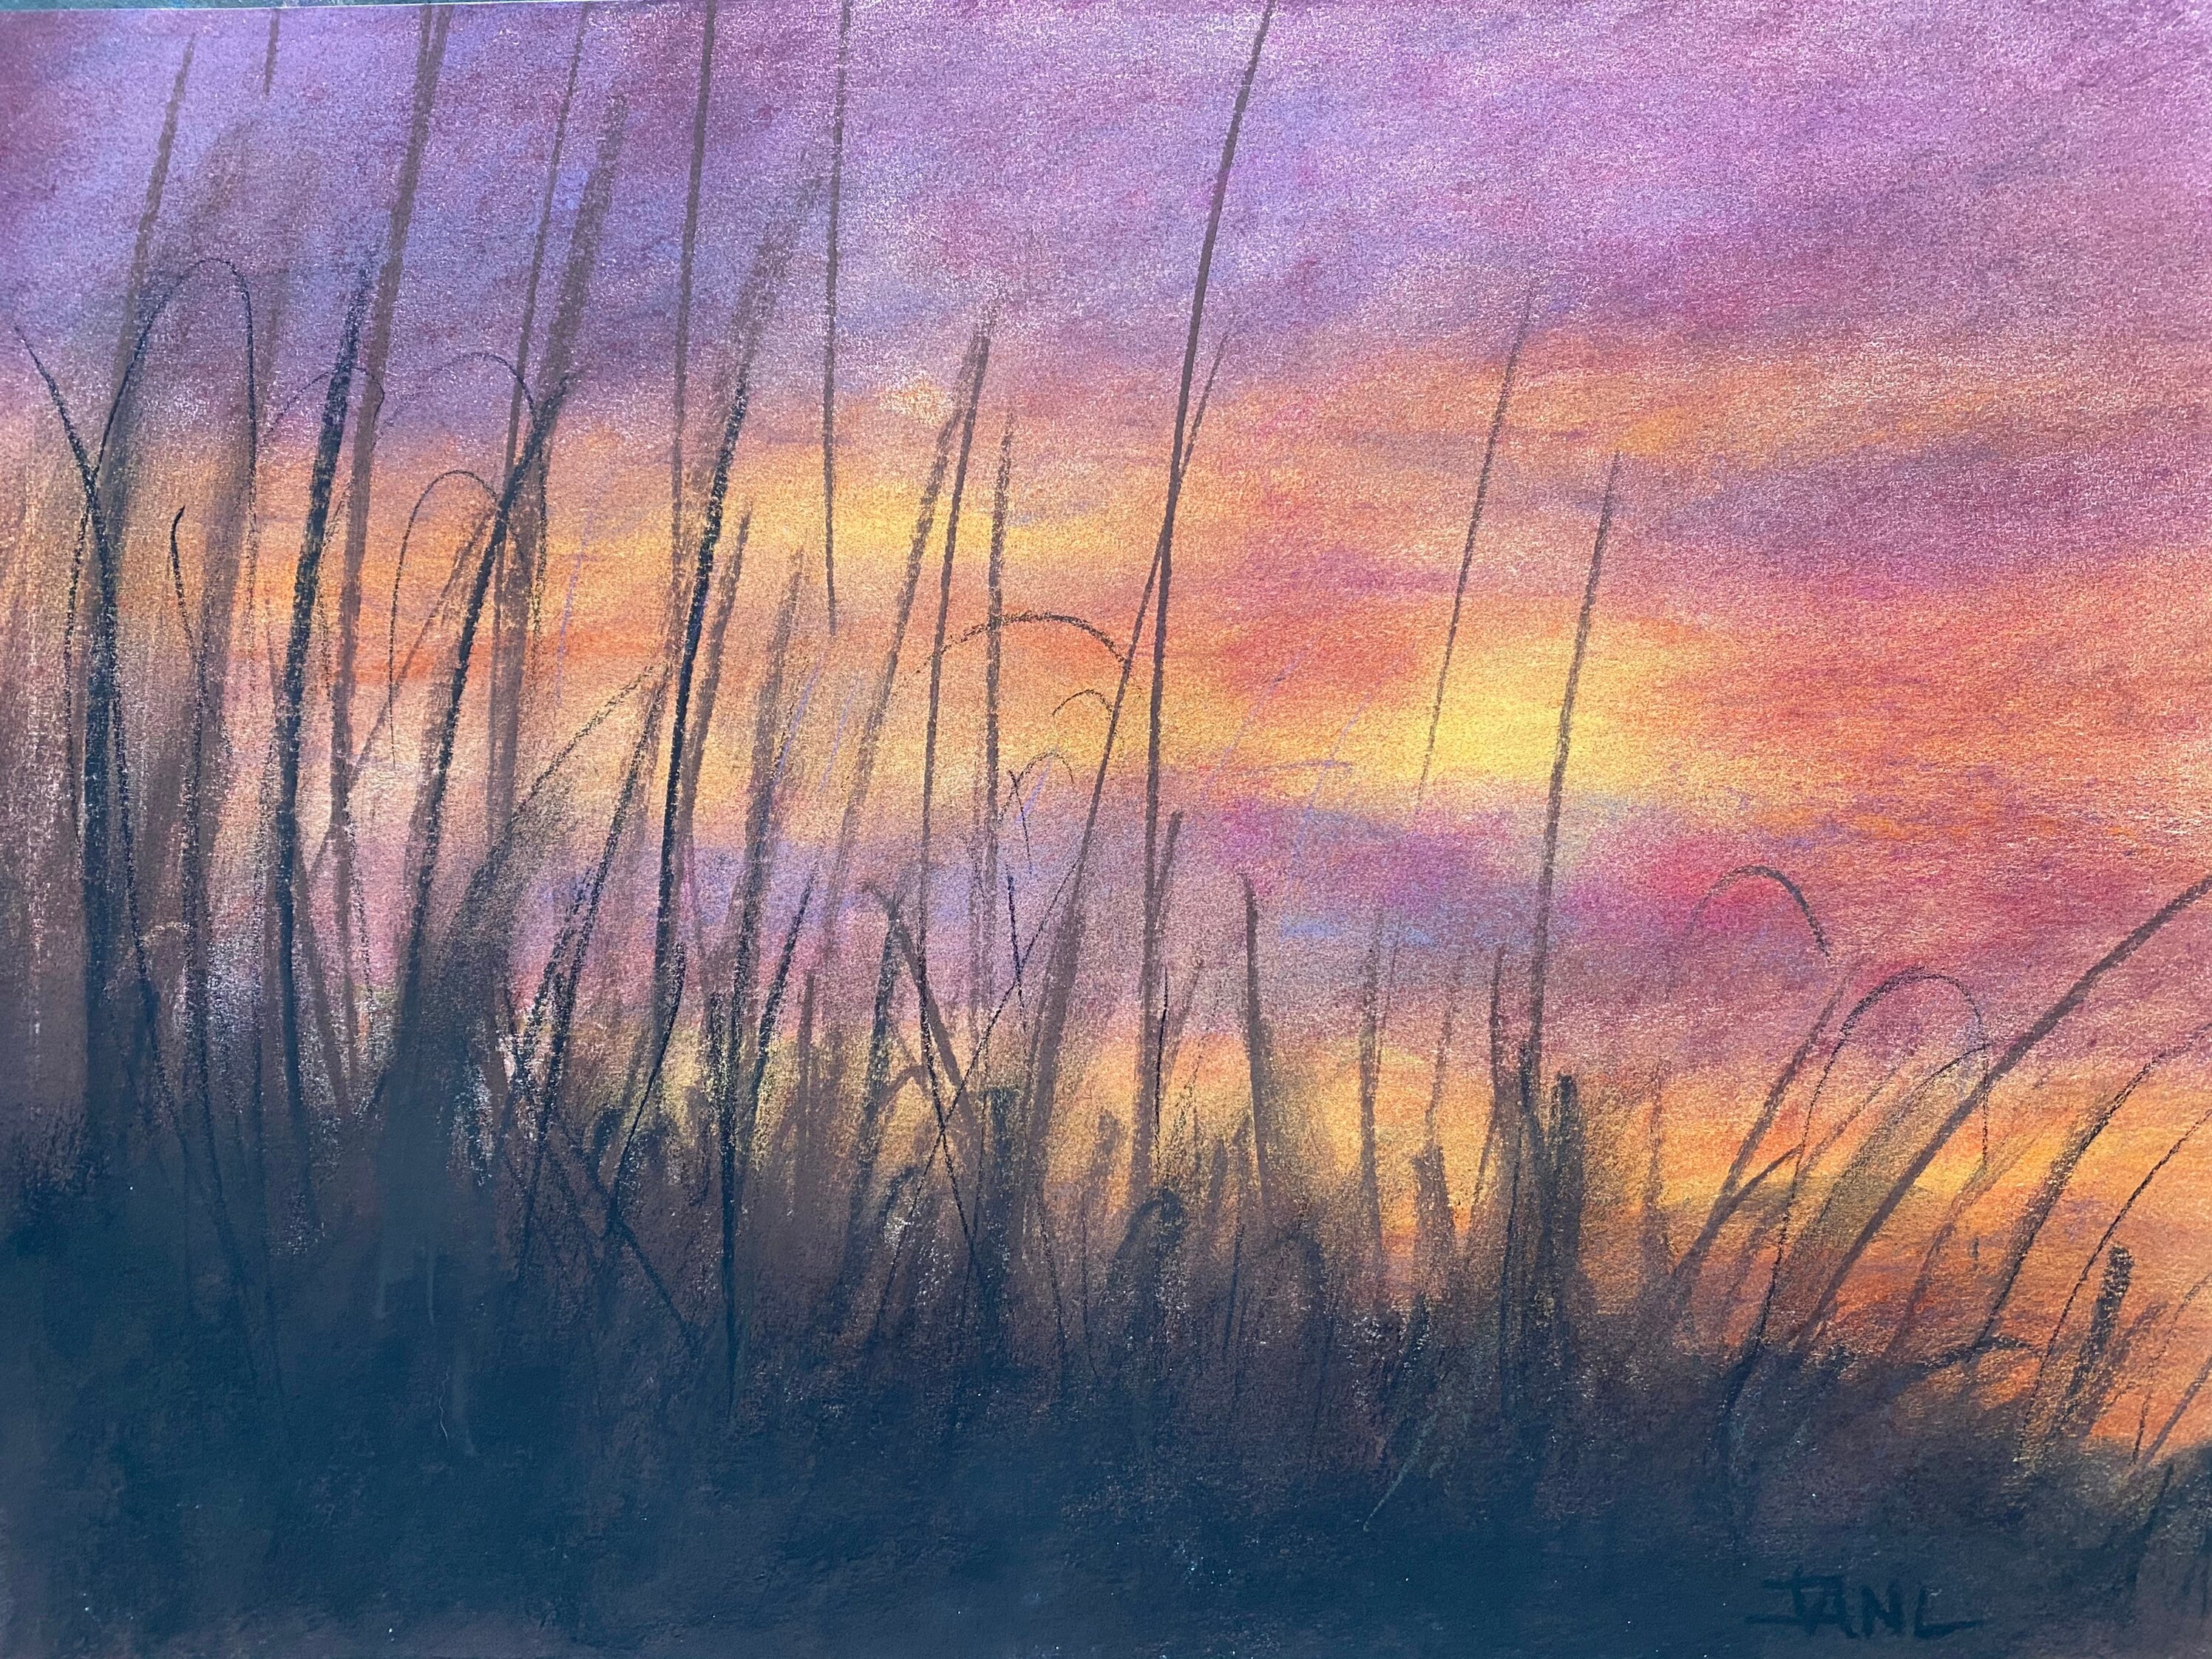 Watercolor painting - Sunset Landscape Painting of an open field step by  step, Shiba Basan